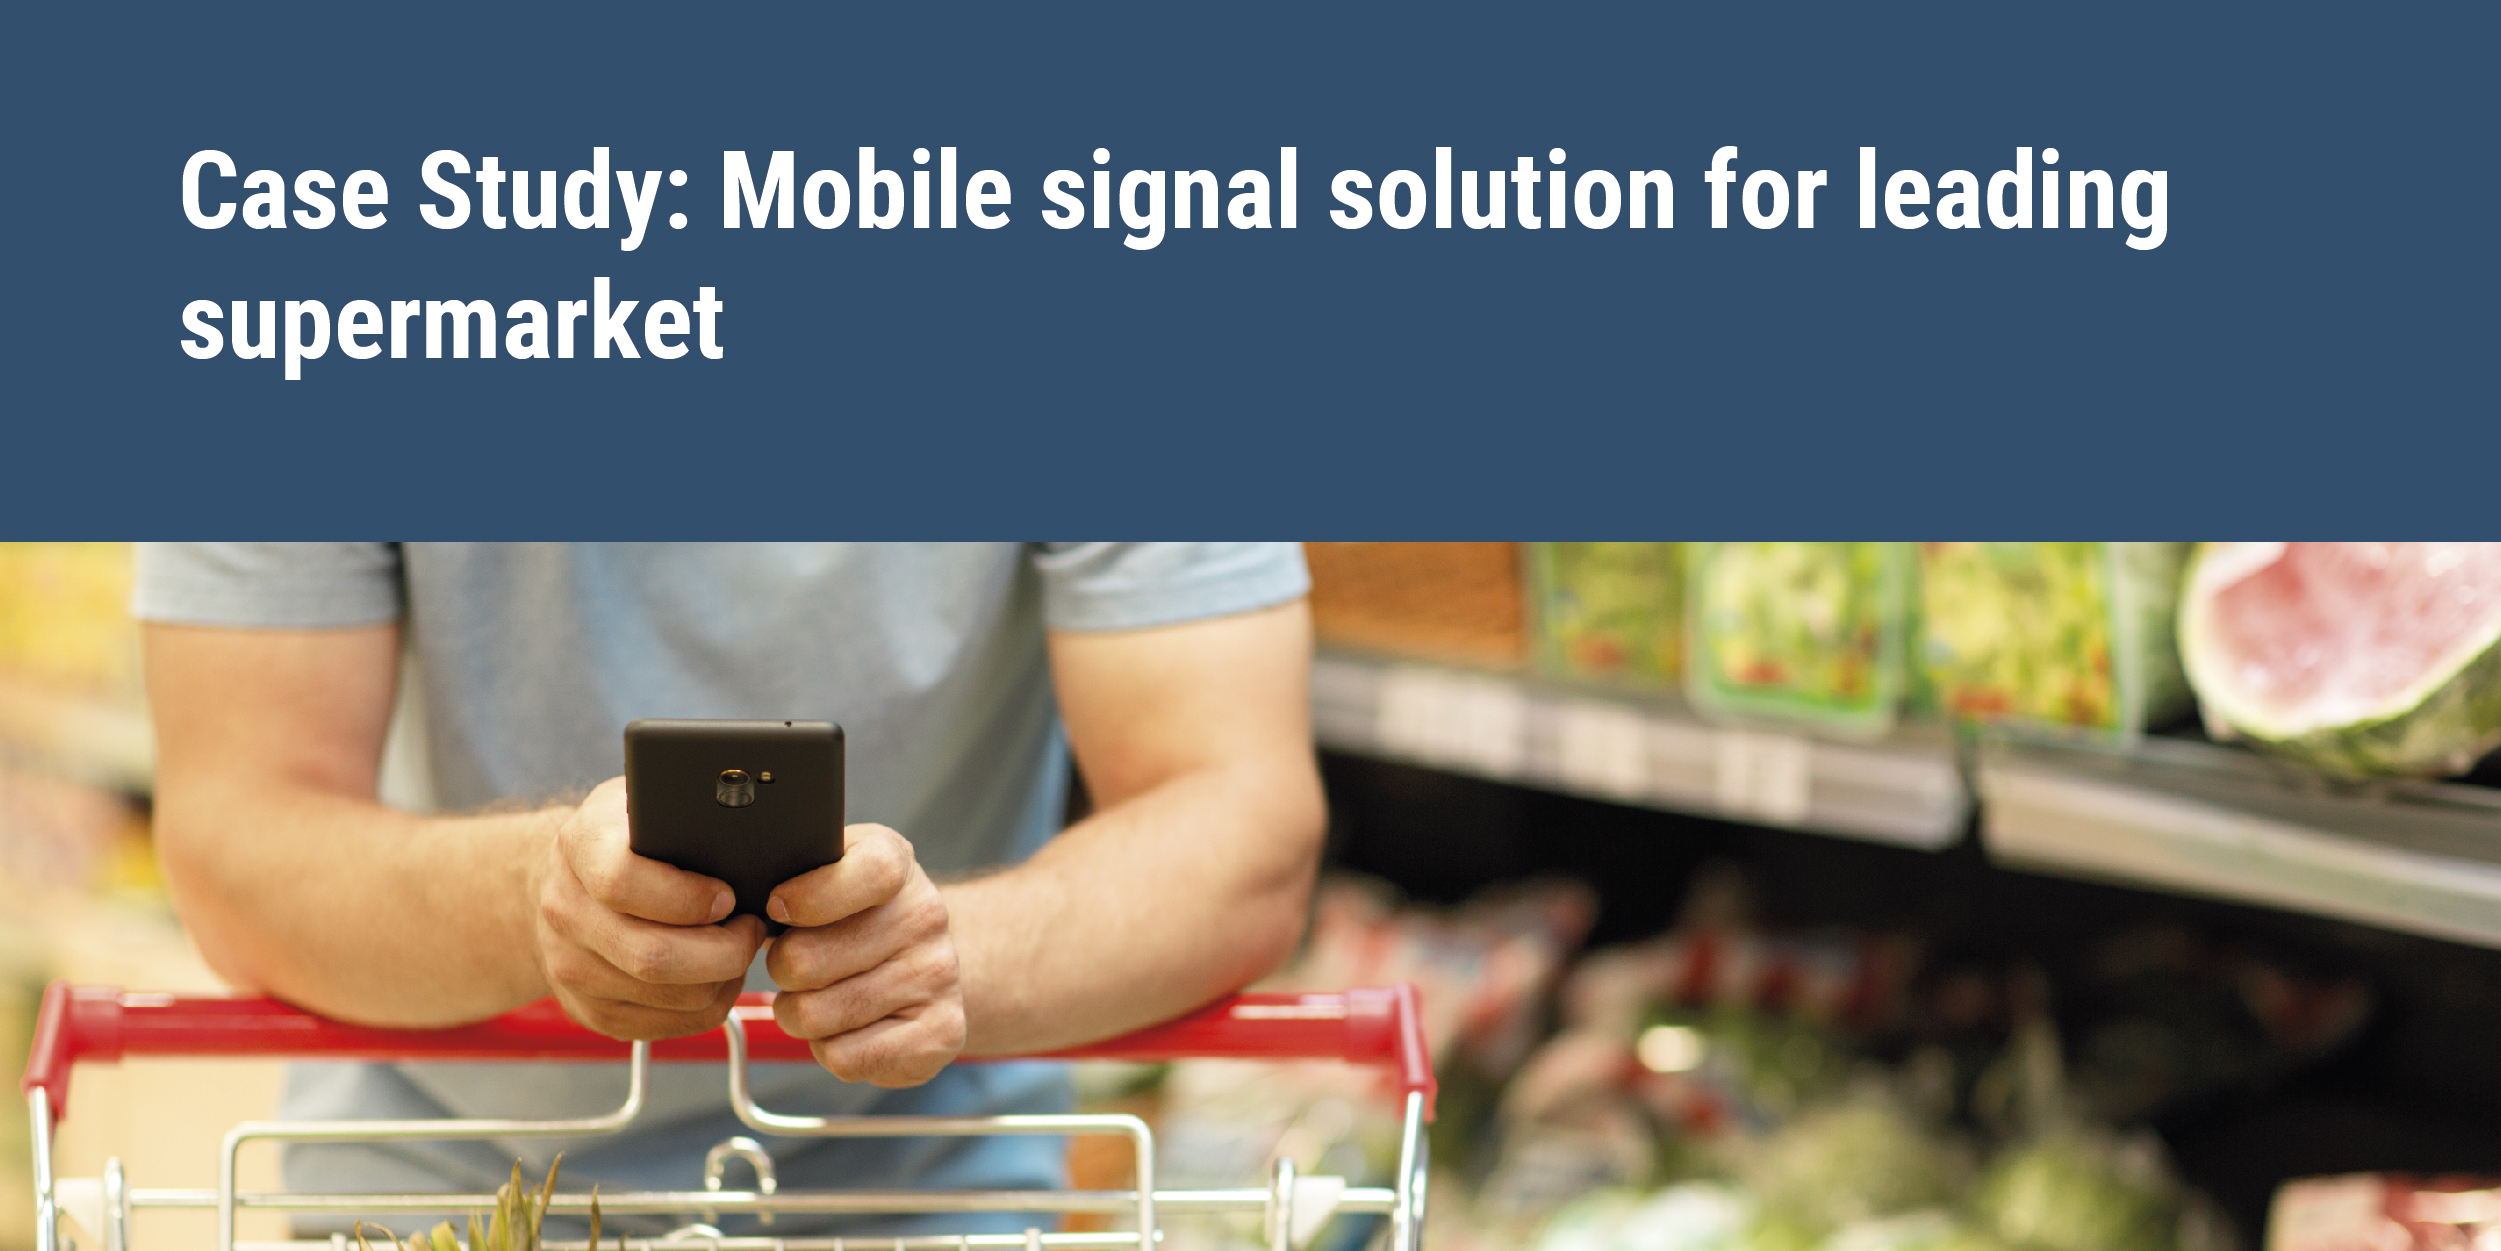 Case Study: Mobile signal solution for leading supermarket man on phone in supermarket